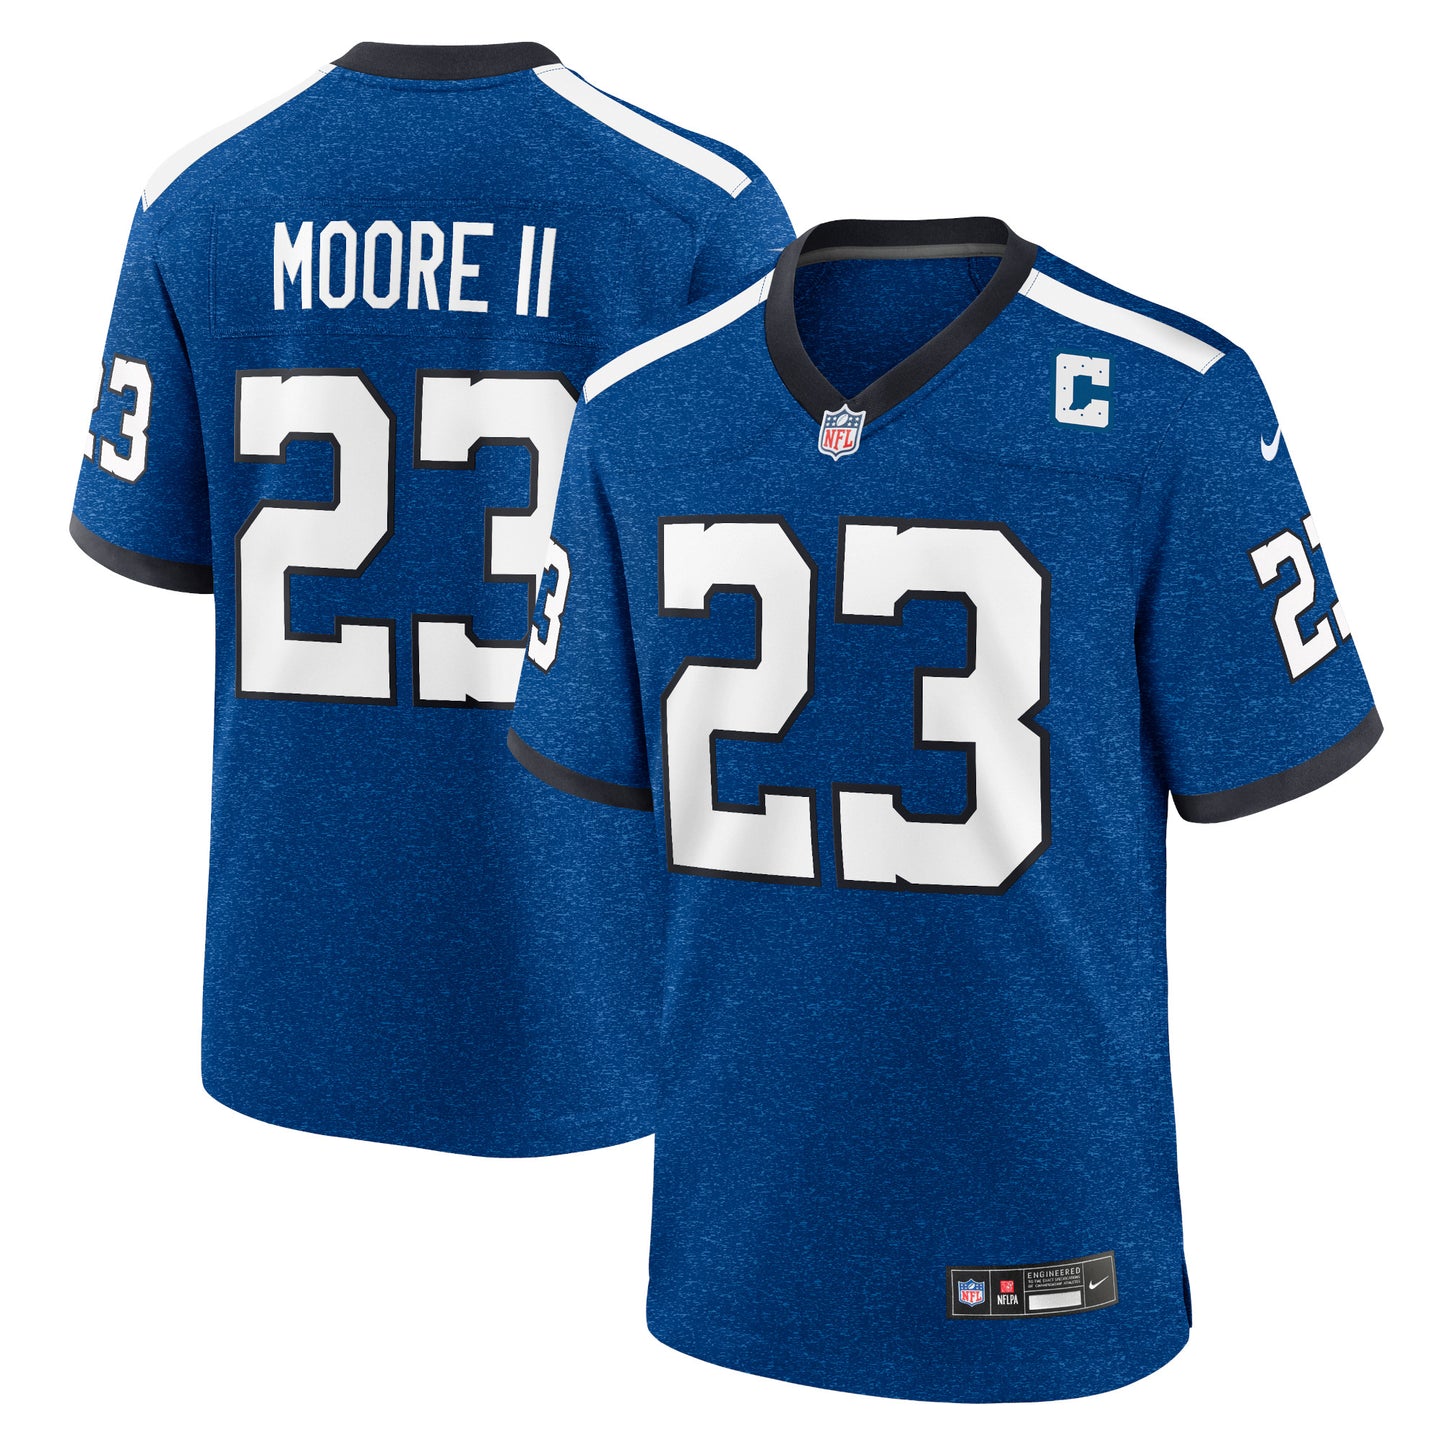 Kenny Moore II Indianapolis Colts Nike Indiana Nights Alternate Game Jersey - Royal